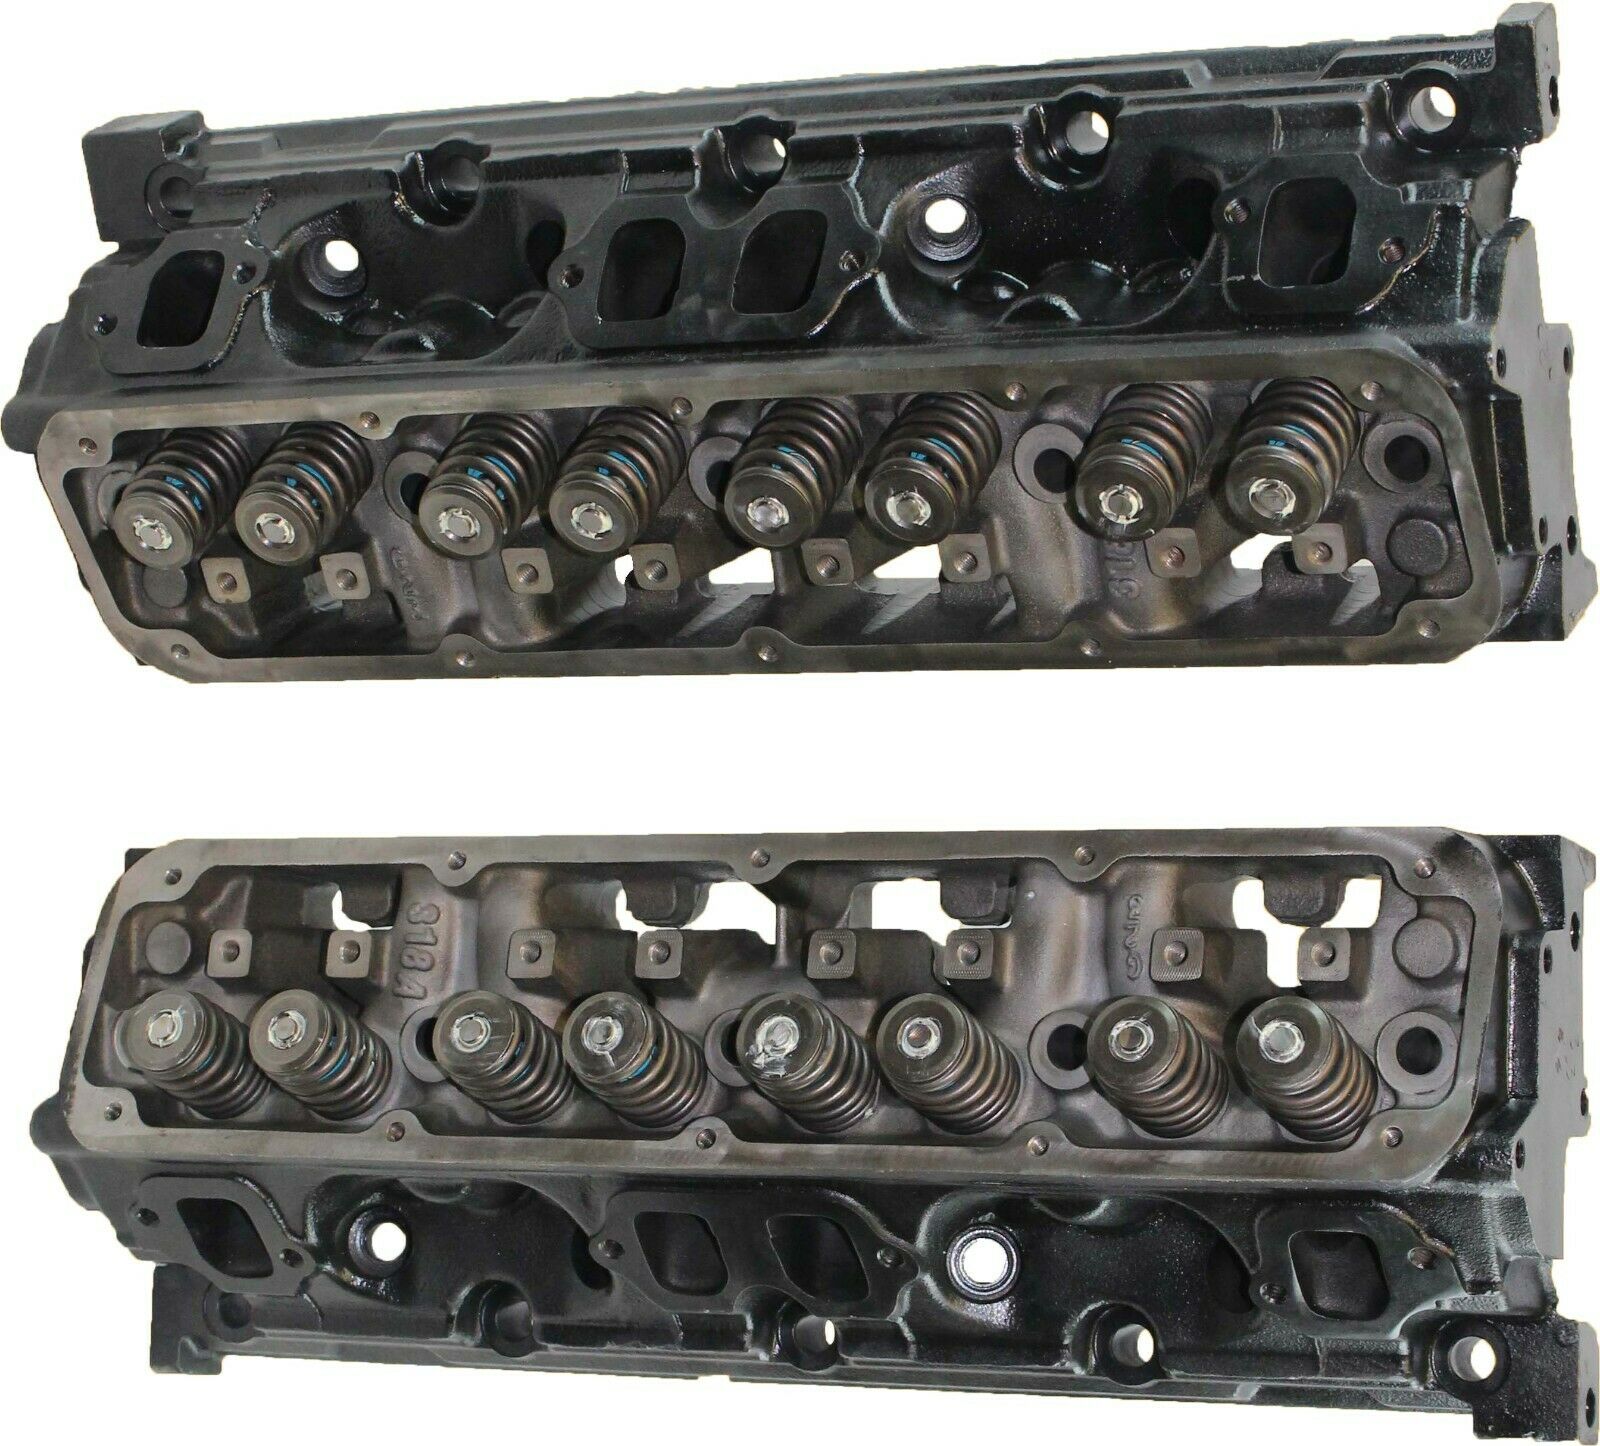 ADV Remanufactured Replacement for Dodge Magnum Jeep 5.2 5.9 OHV Mopar 318 360 Cylinder Head CORE RETURN REQUIRED 